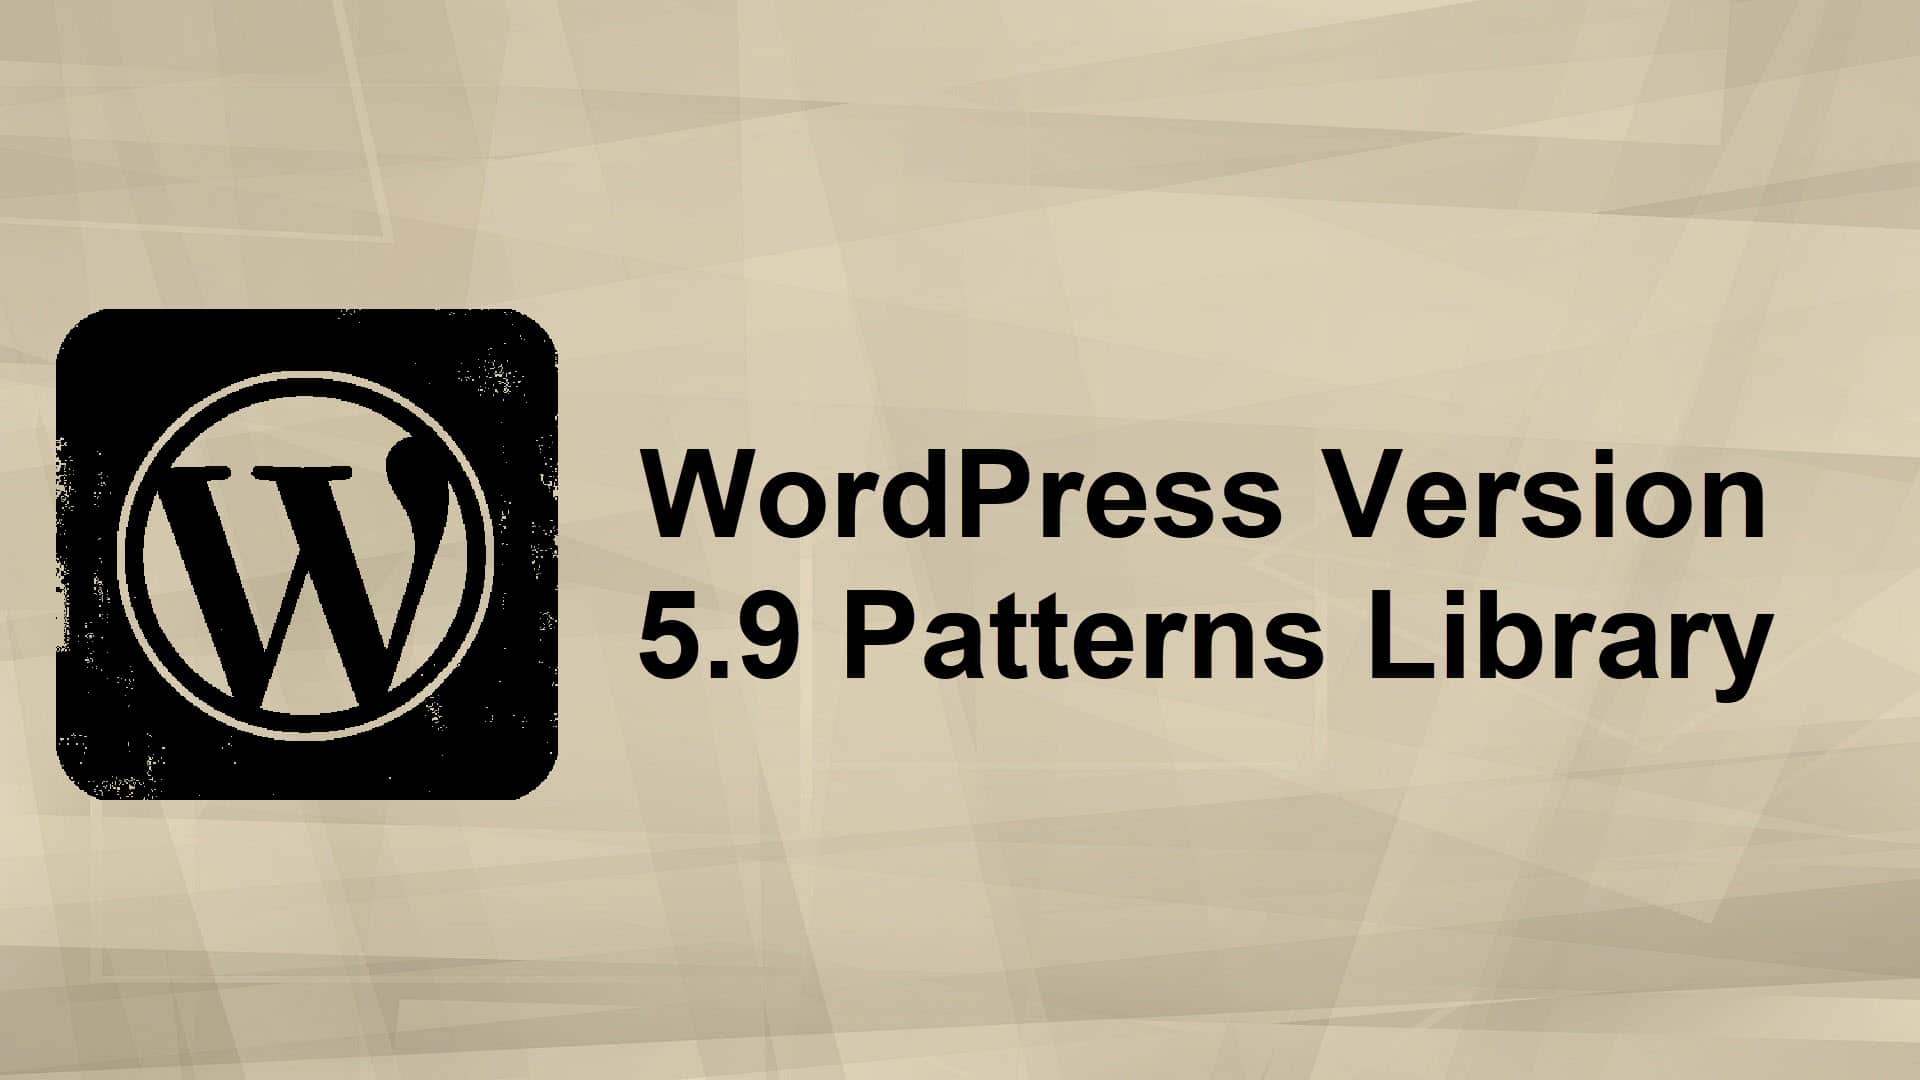 What's New In WordPress 5.9 Patterns Library Featured